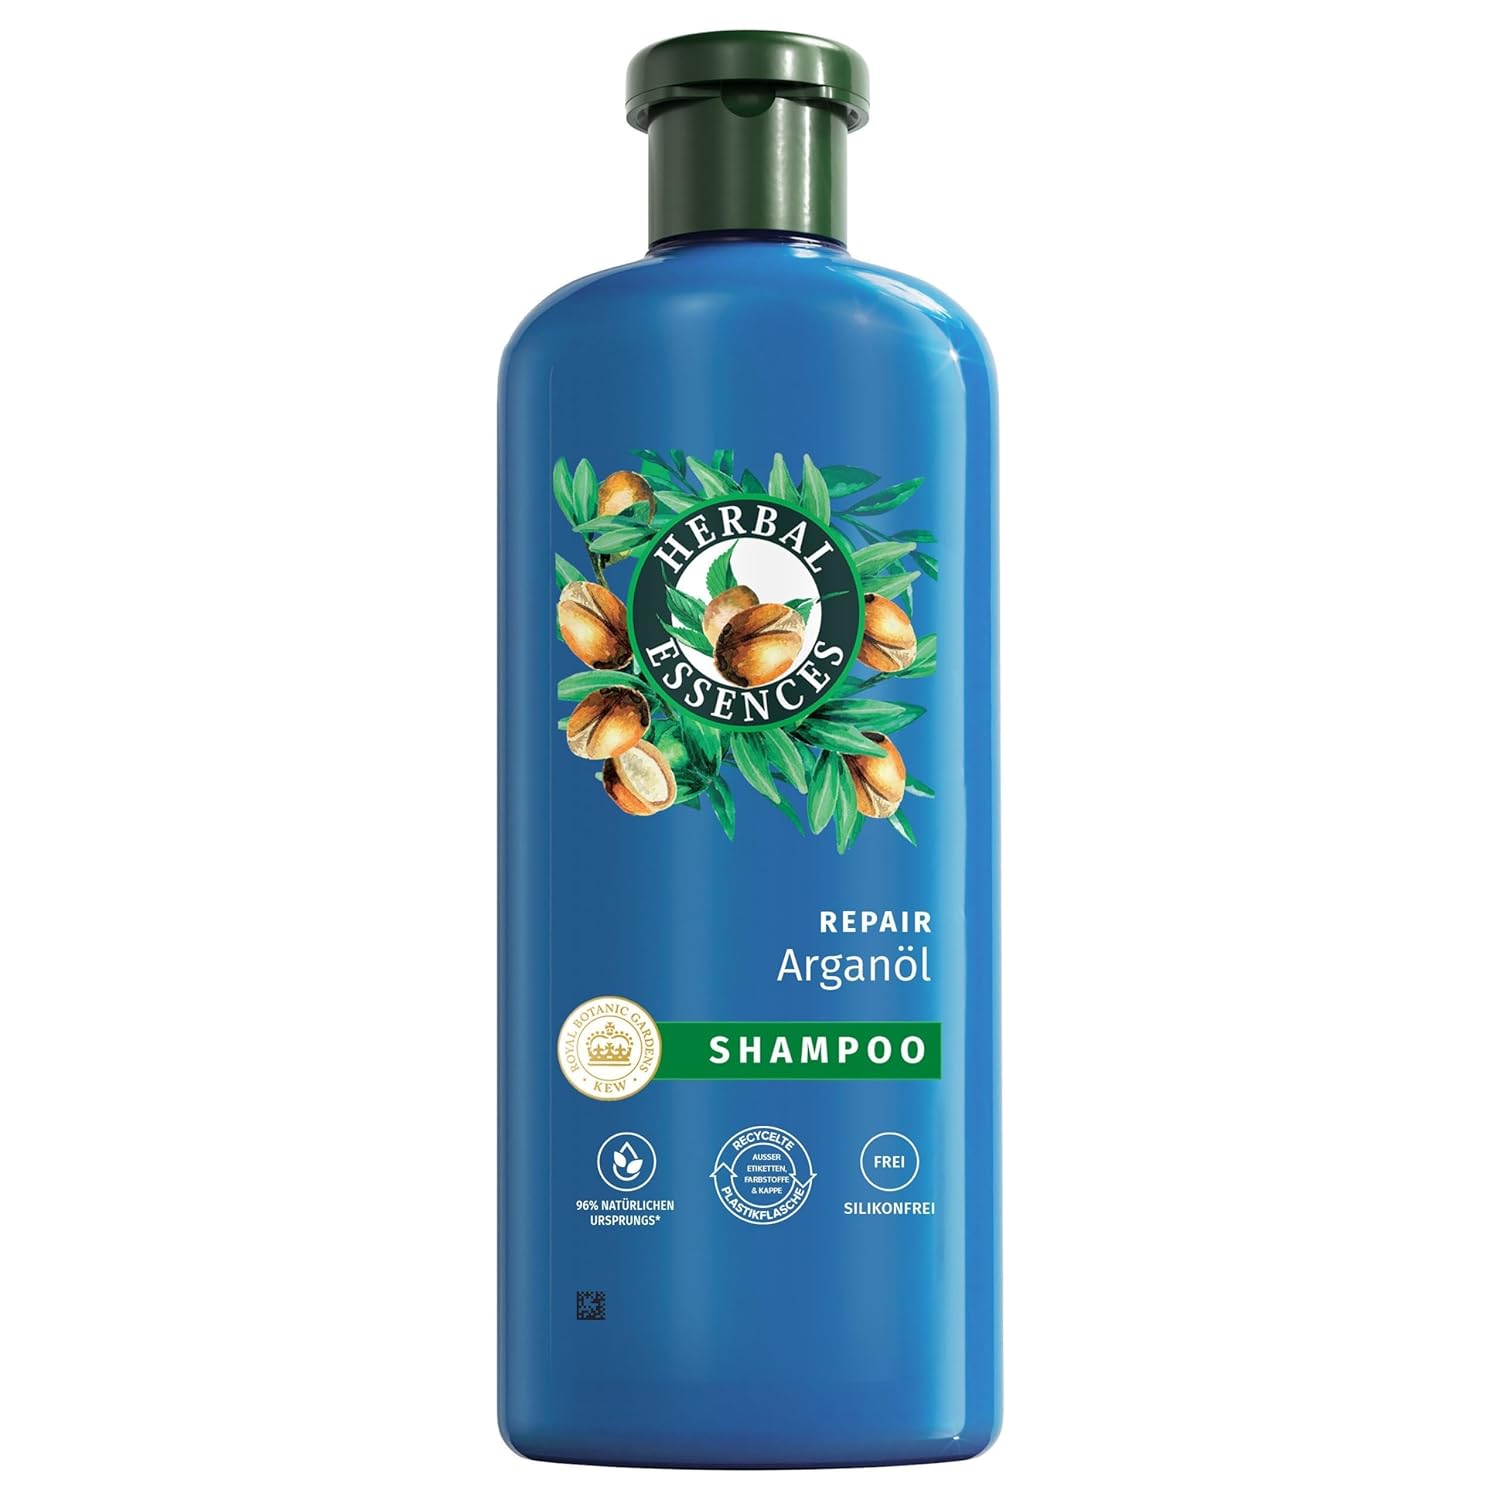 Herbal Essences Repair Shampoo with Argan Oil 350 ml from Damaged to Softer, Shiny Hair, Intensive Care, with Ingredients of Natural Origin, Vegan, Silicone-Free